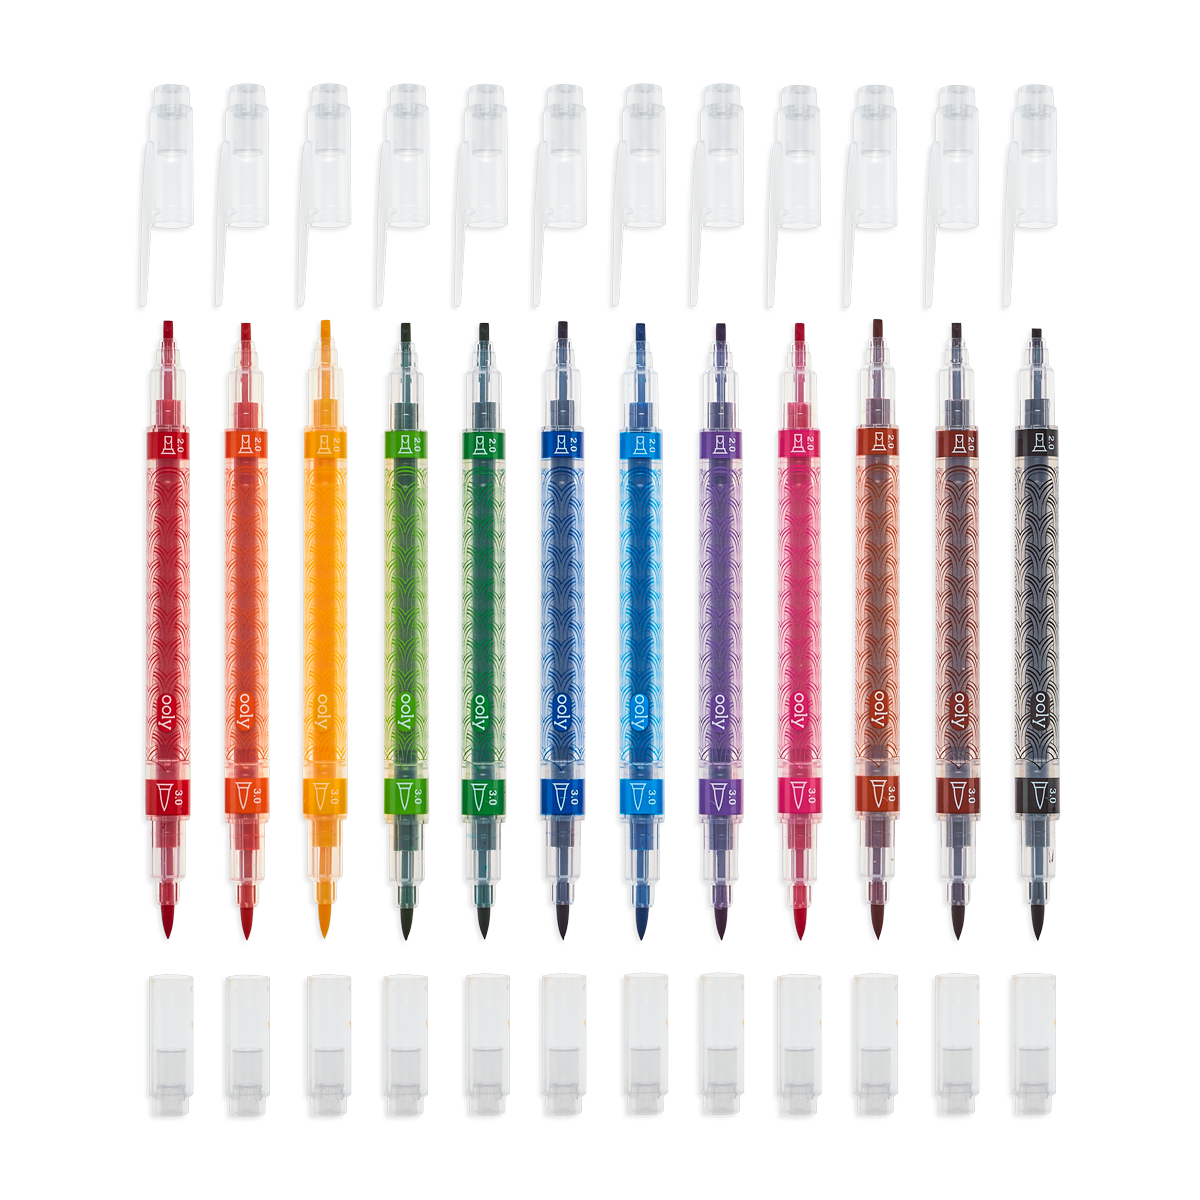 OOLY Brushed double sided felt-tip pens Dual tone